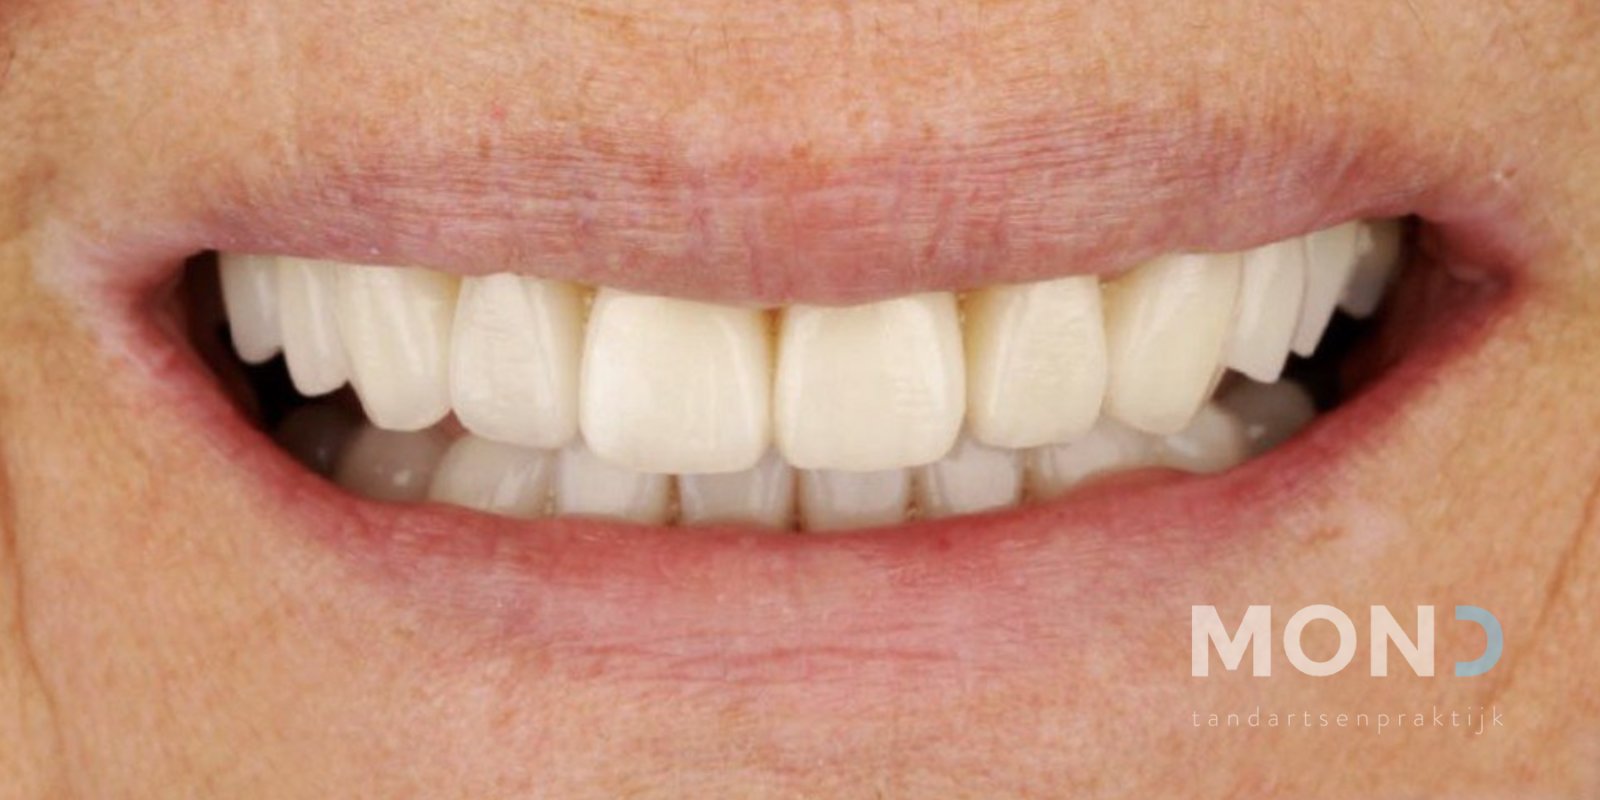 Better lip support thanks to new veneers